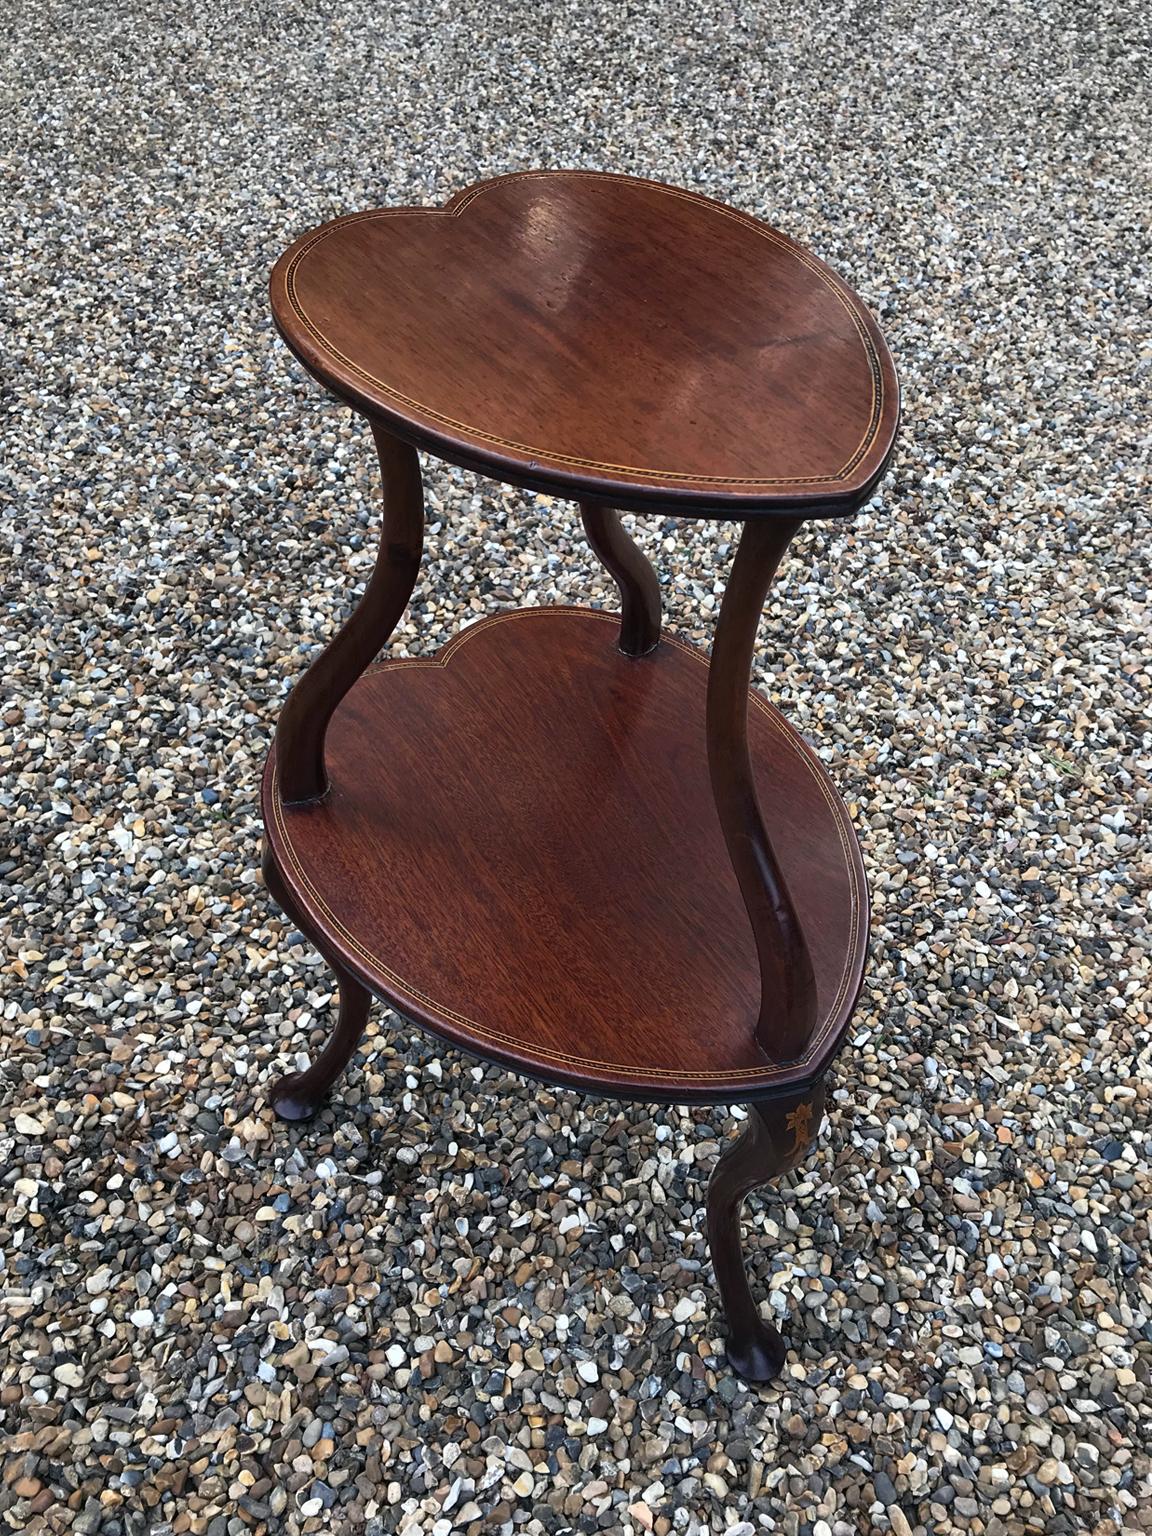 19th century mahogany inlaid heart shaped occasional table with 2 tiers and three splayed legs,

circa 1880

Dimensions:
Height: 24.5 inches - 62 cms
Width: 12 inches - 31 cms
Depth: 14.5 inches - 37 cms.

 